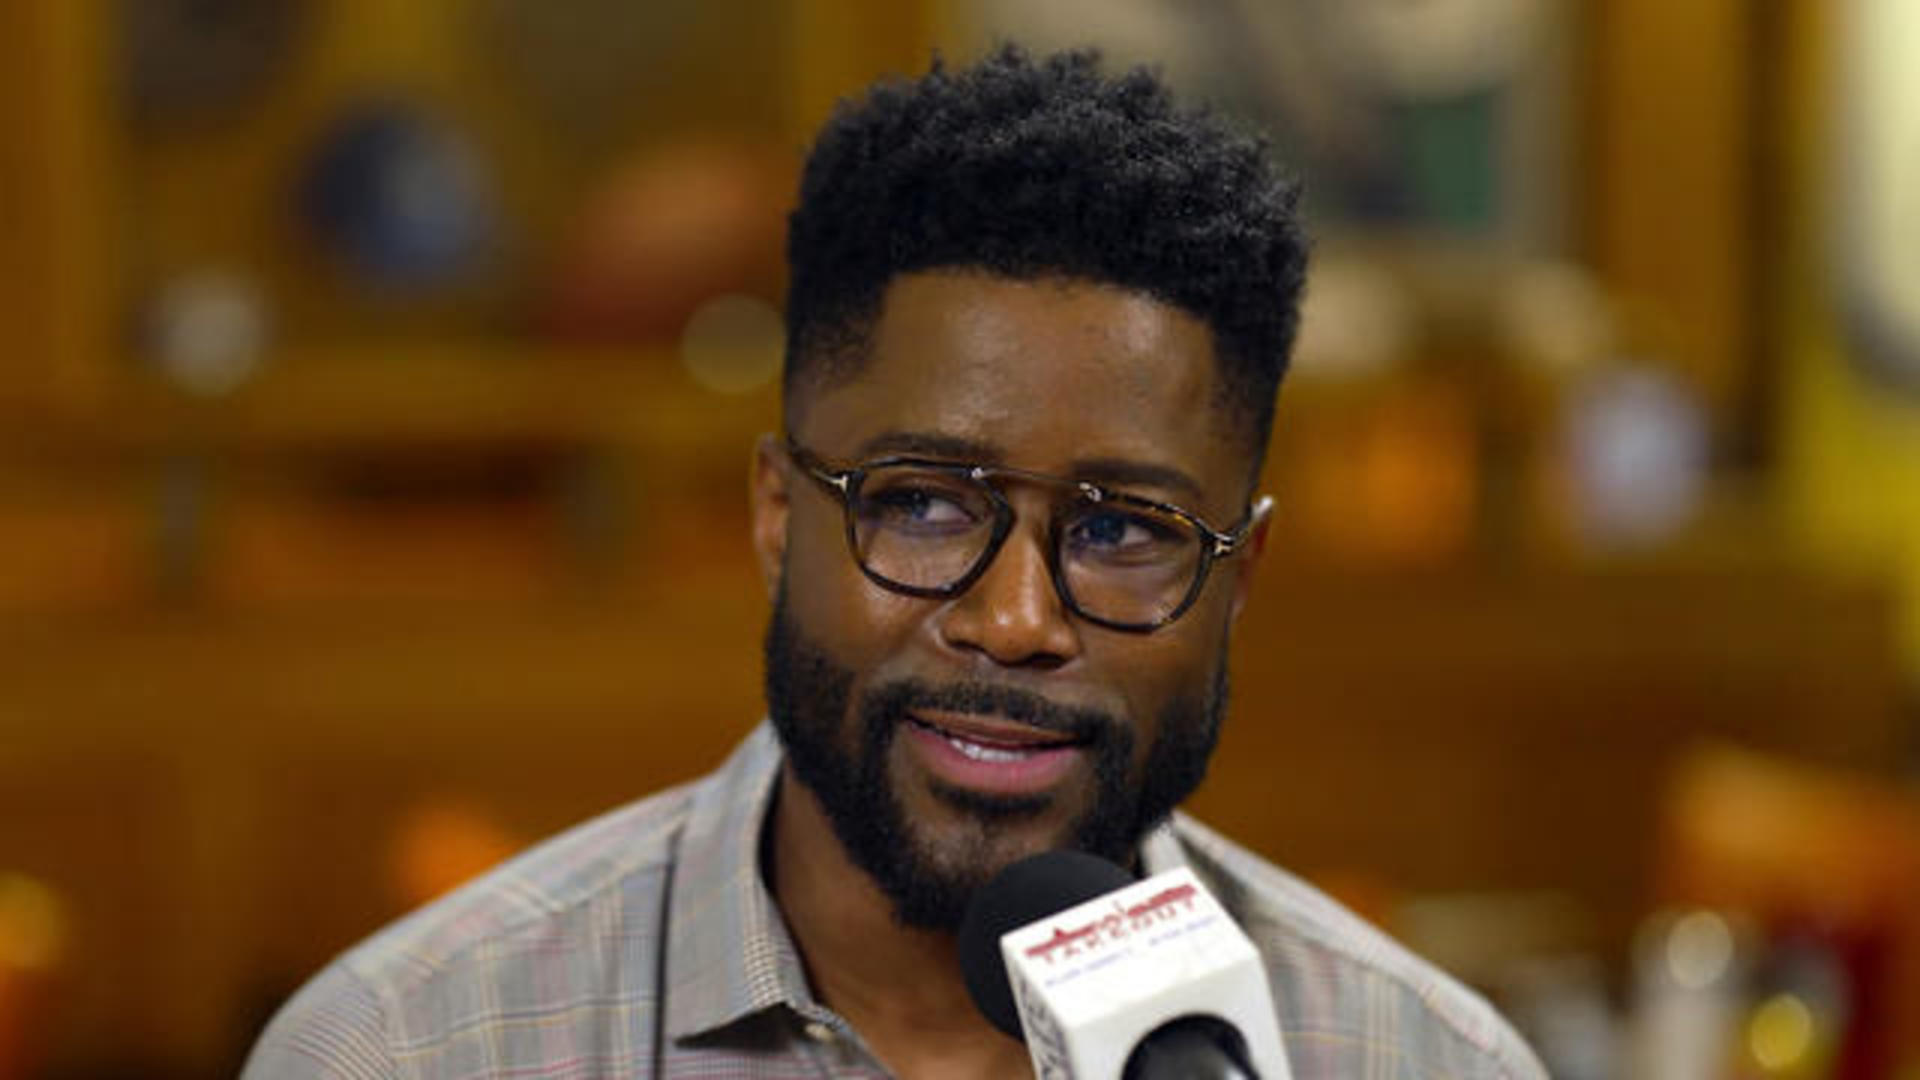 CBS Mornings' co-host Nate Burleson on 'The Takeout' — 11/25/2022 - CBS News